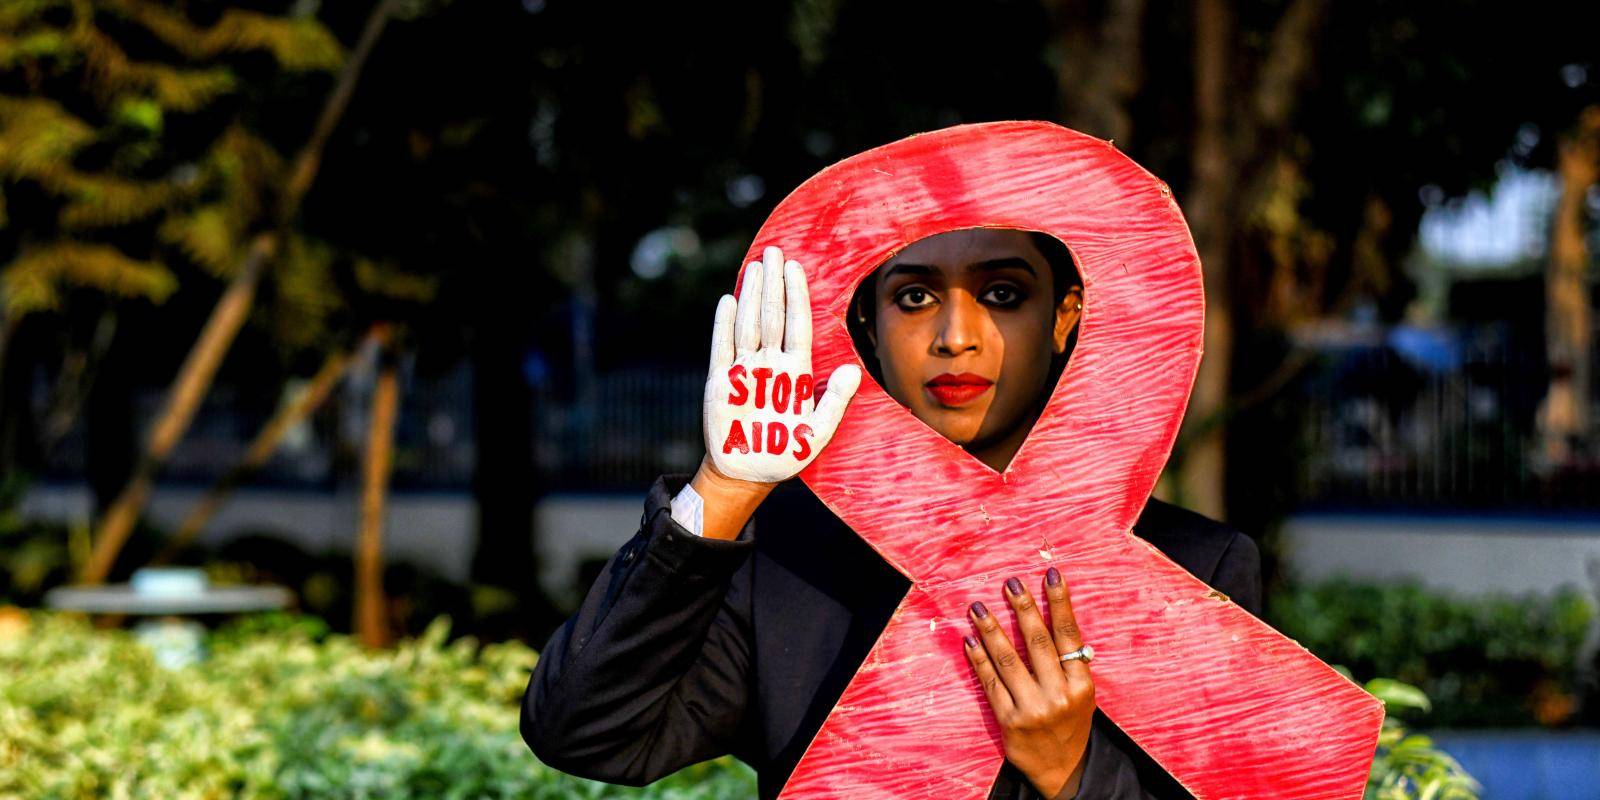 An activist dressed in black holds a replica of the red ribbon symbolizing awareness of and support for those living with HIV. They also raise the palm of their right hand, which is painted with the slogan 'Stop AIDS'.